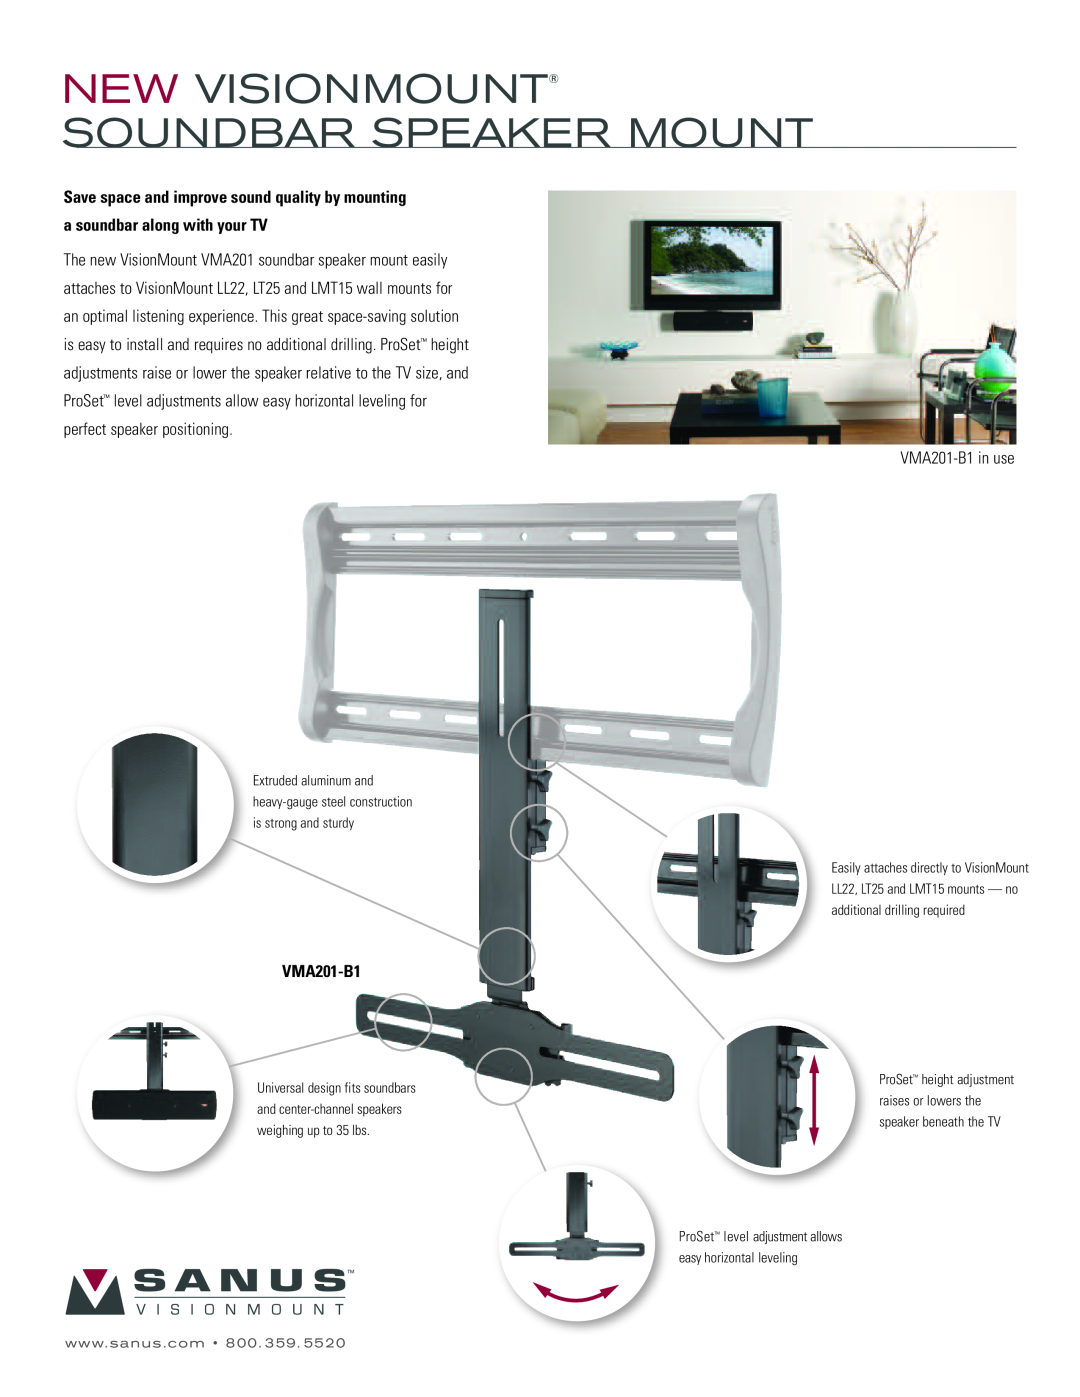 Sanus Systems VMA201-B1 manual New Visionmount Soundbar Speaker Mount, Save space and improve sound quality by mounting 